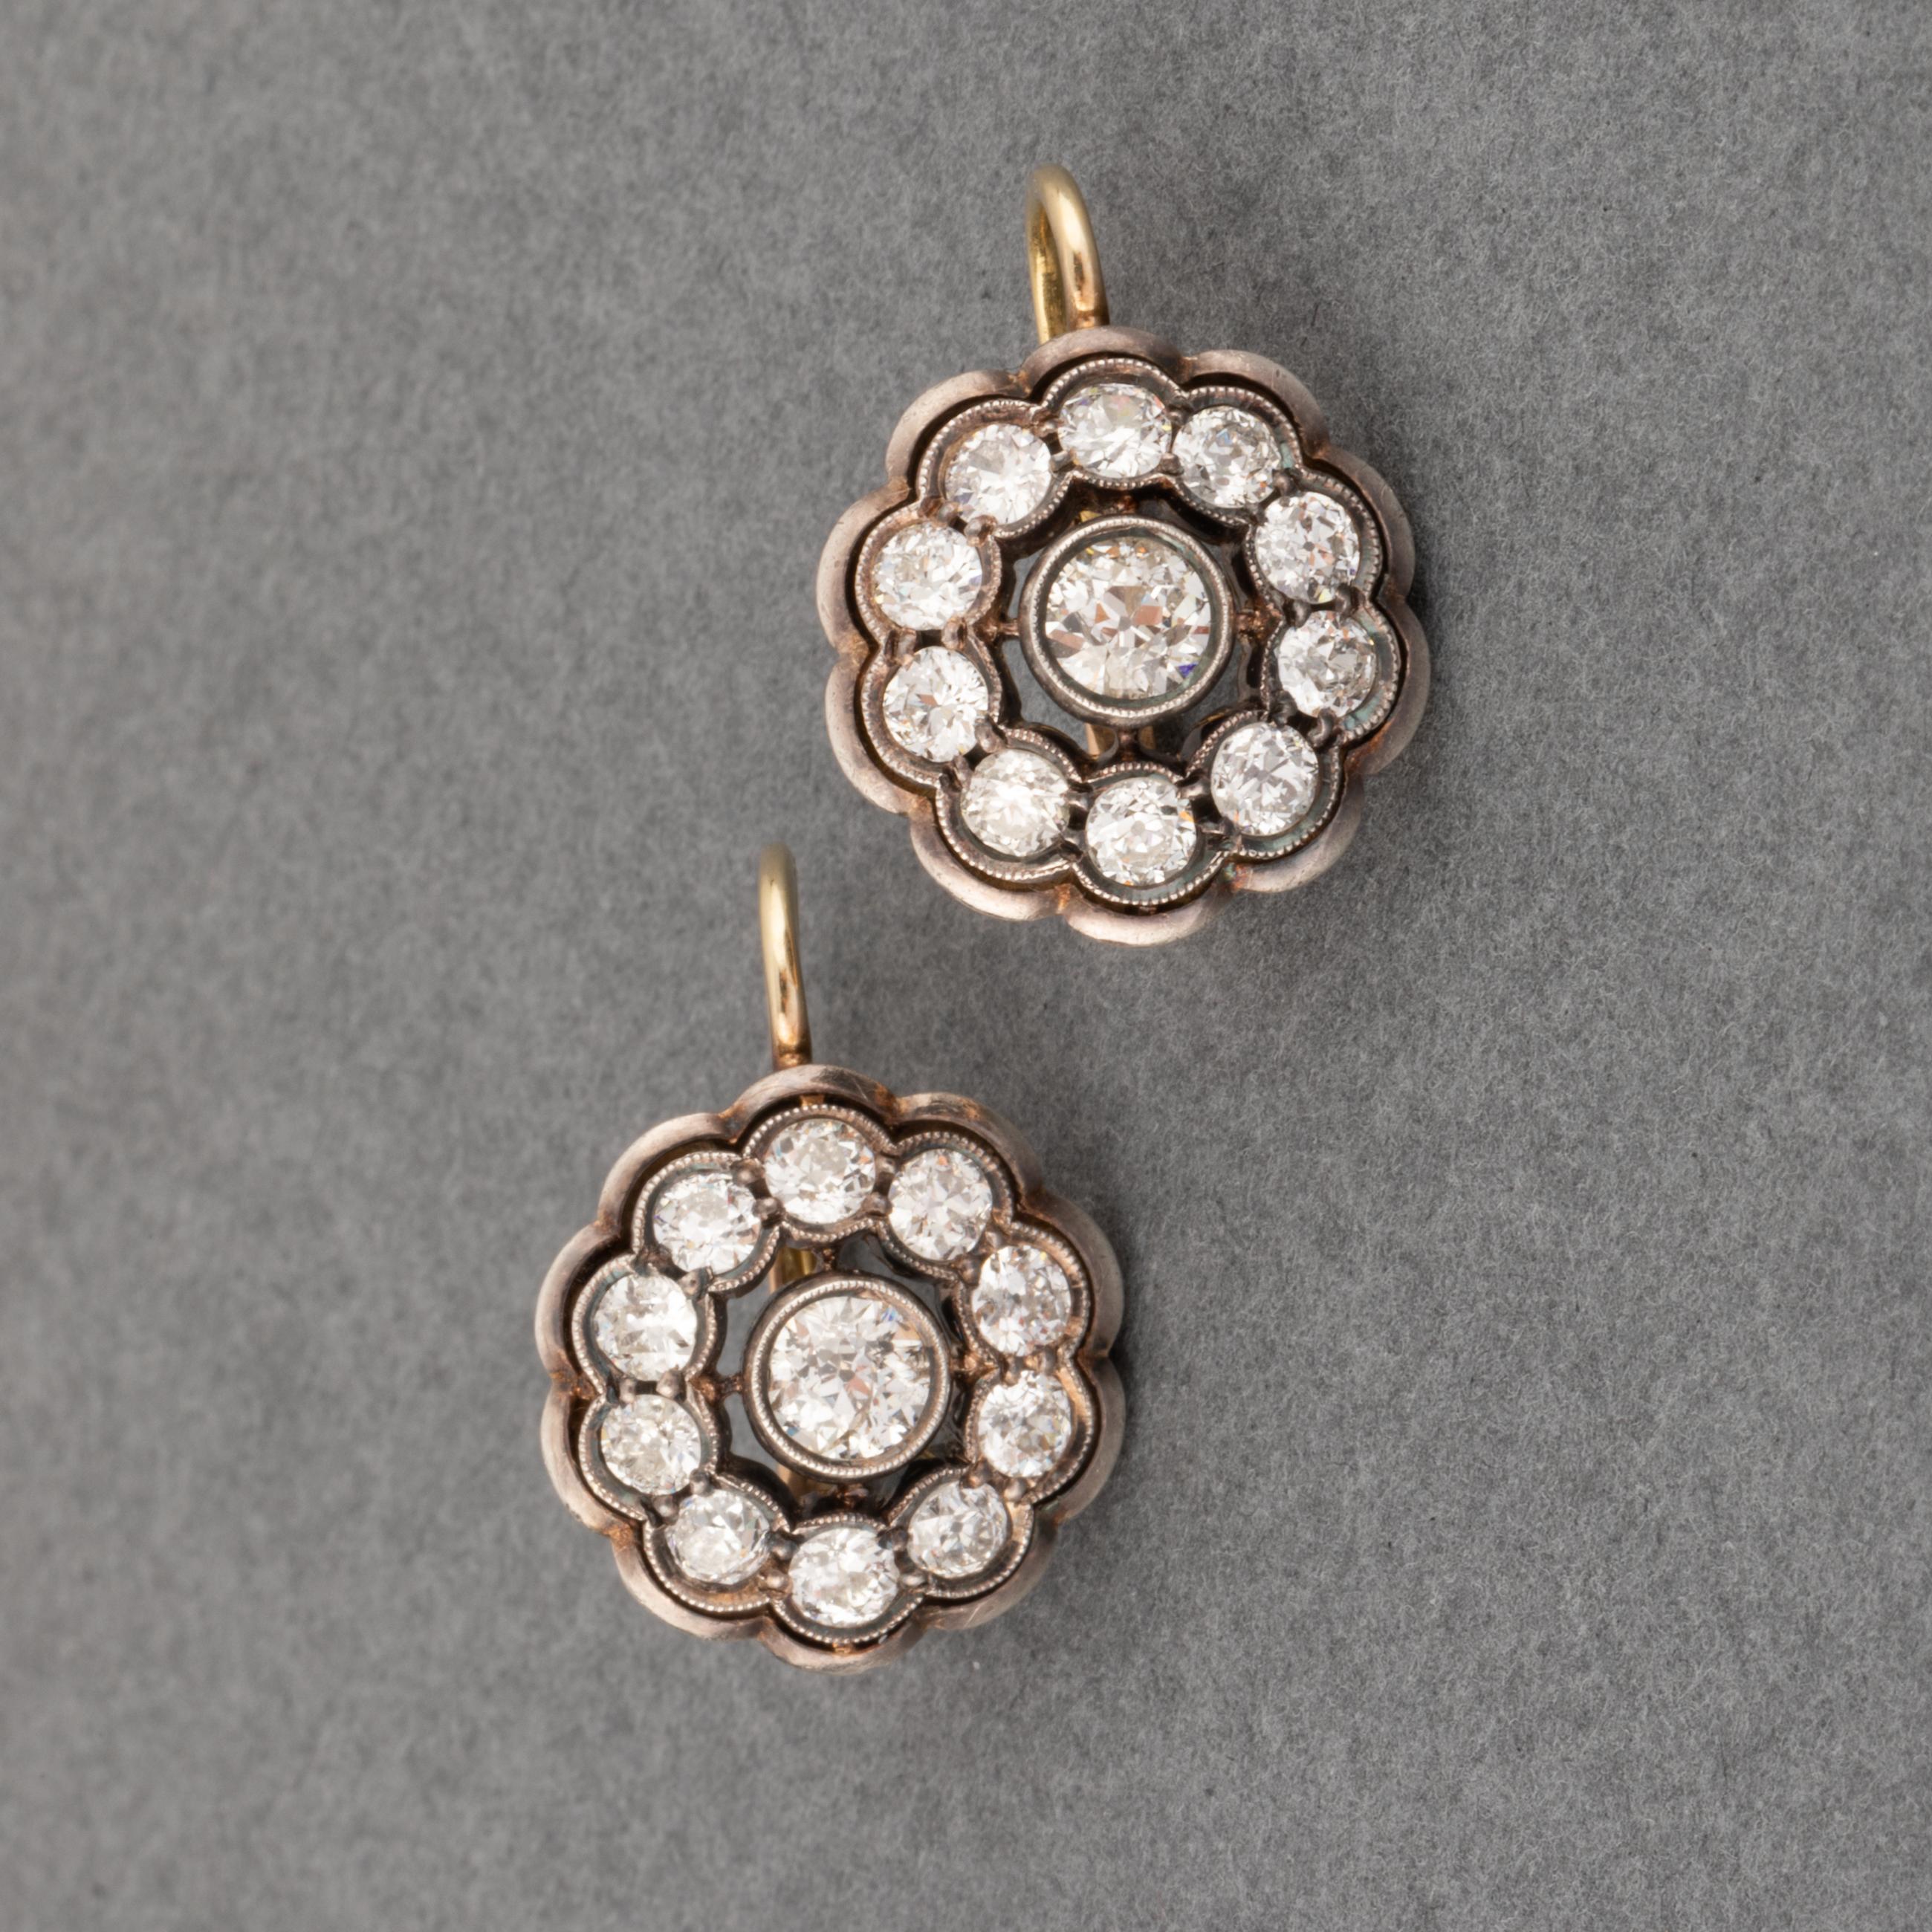 One lovely pair of antique diamonds earrings, European made circa 1900. Made in gold and silver.
The diamonds weights 1.50 carats per earrings, the bigger ones weights 0.40 carats each approximately.
Dimensions of earrings:  16mm diameter
weight: